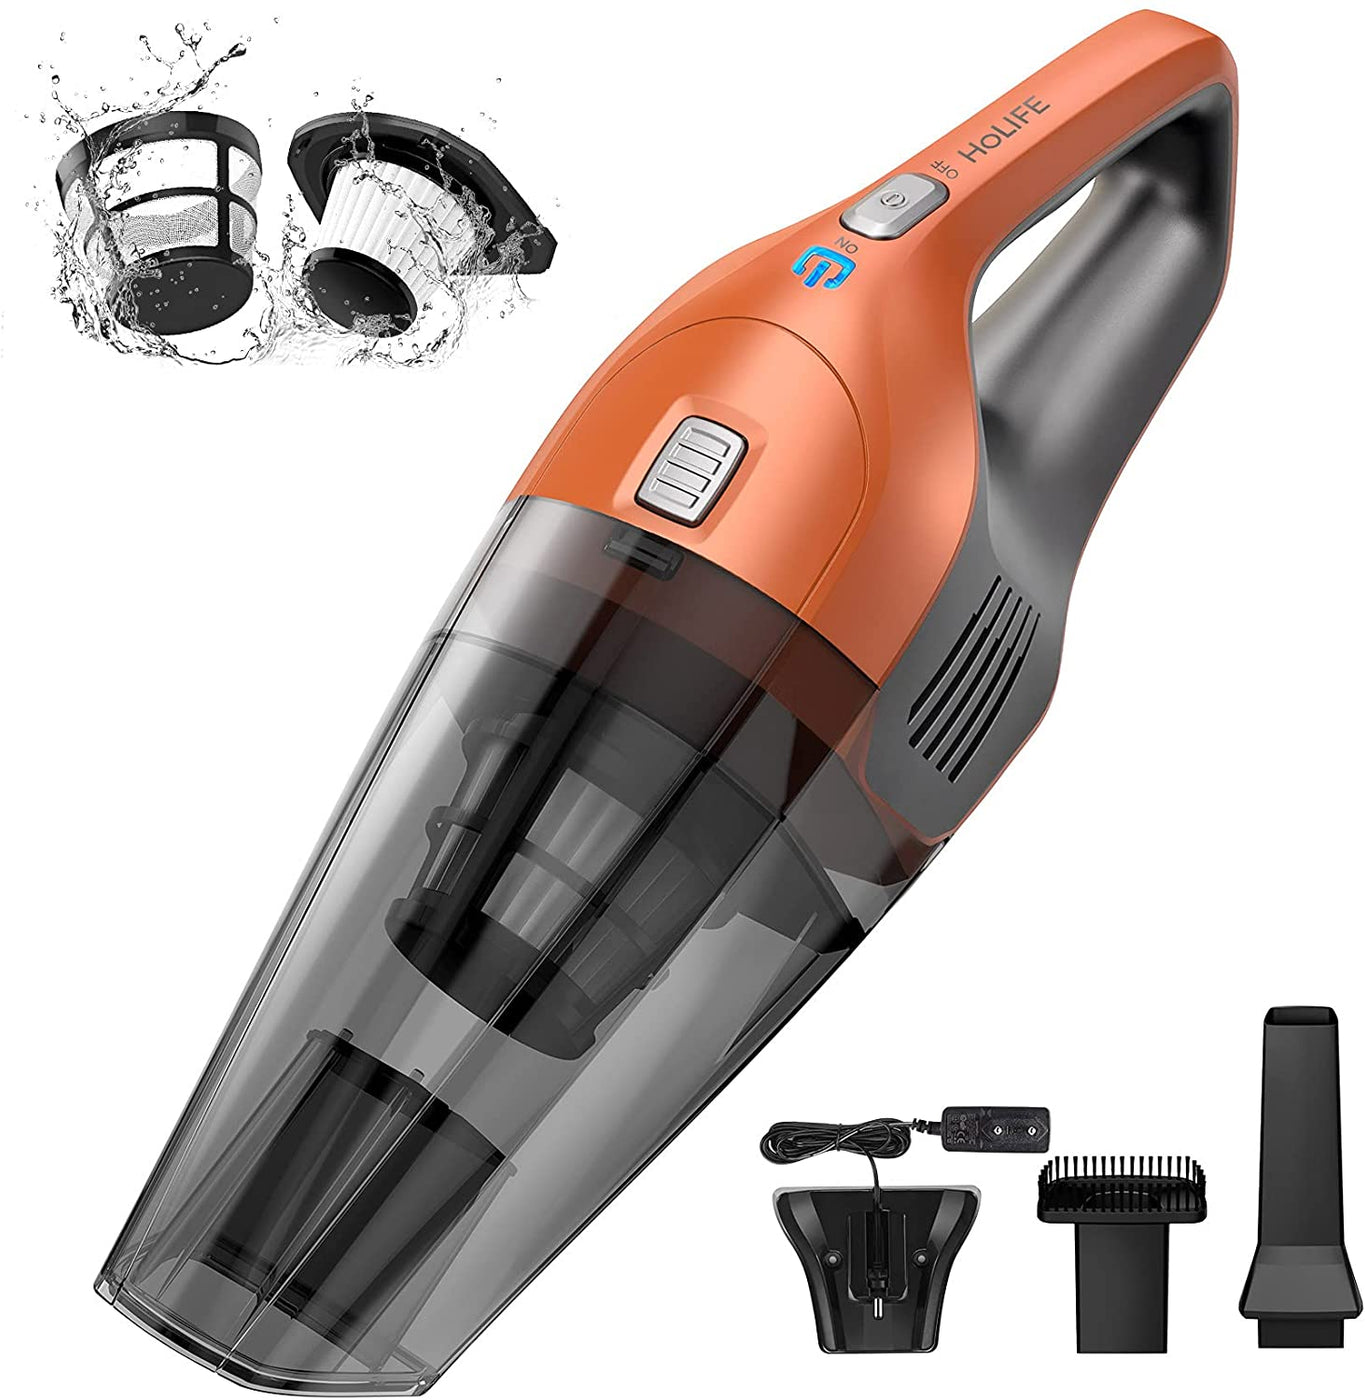 Holife HLHM218BEUS HLHM218BWUS, Hand Cyclonic Suction, Handheld Vacuum